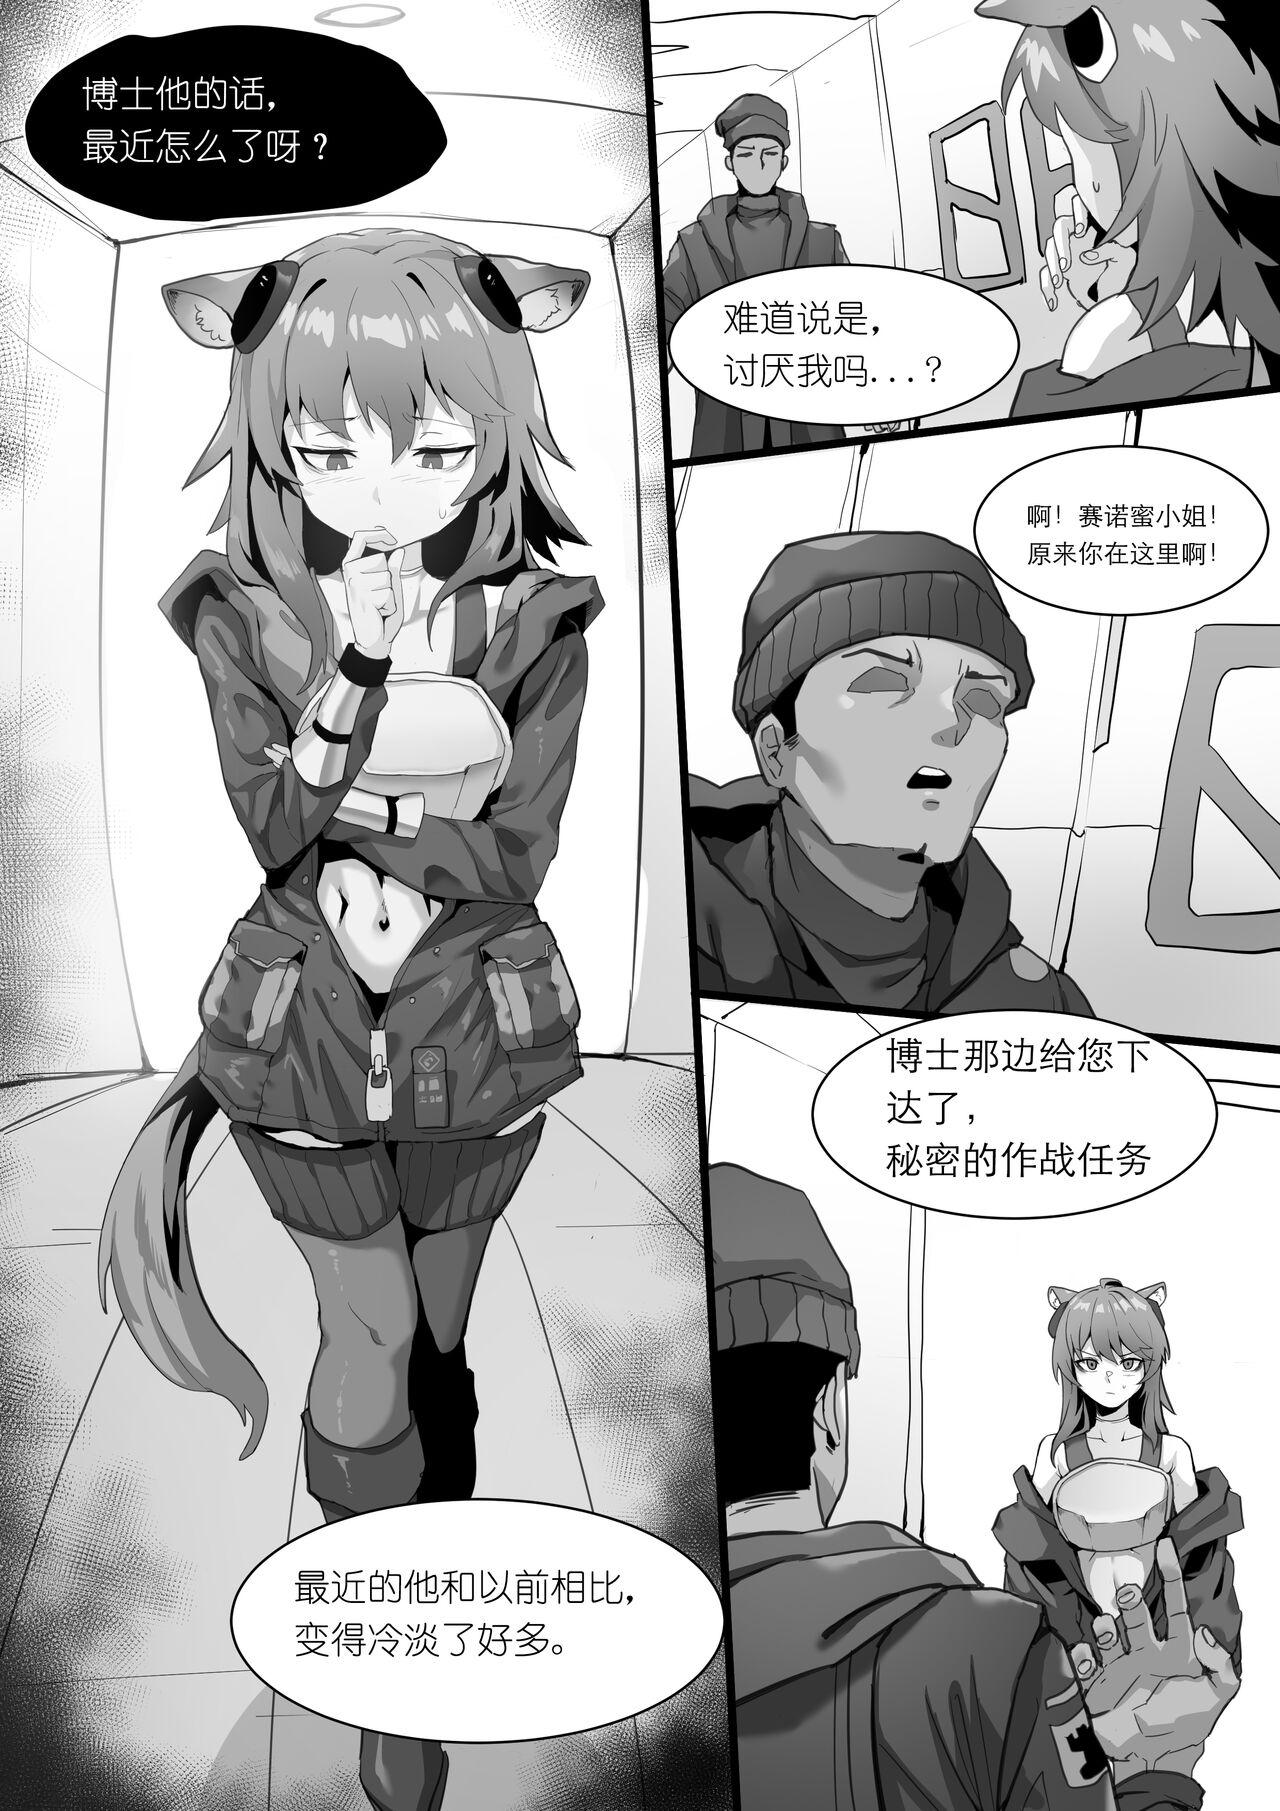 Jerkoff 欲望方舟记录3 - Arknights Freckles - Page 6